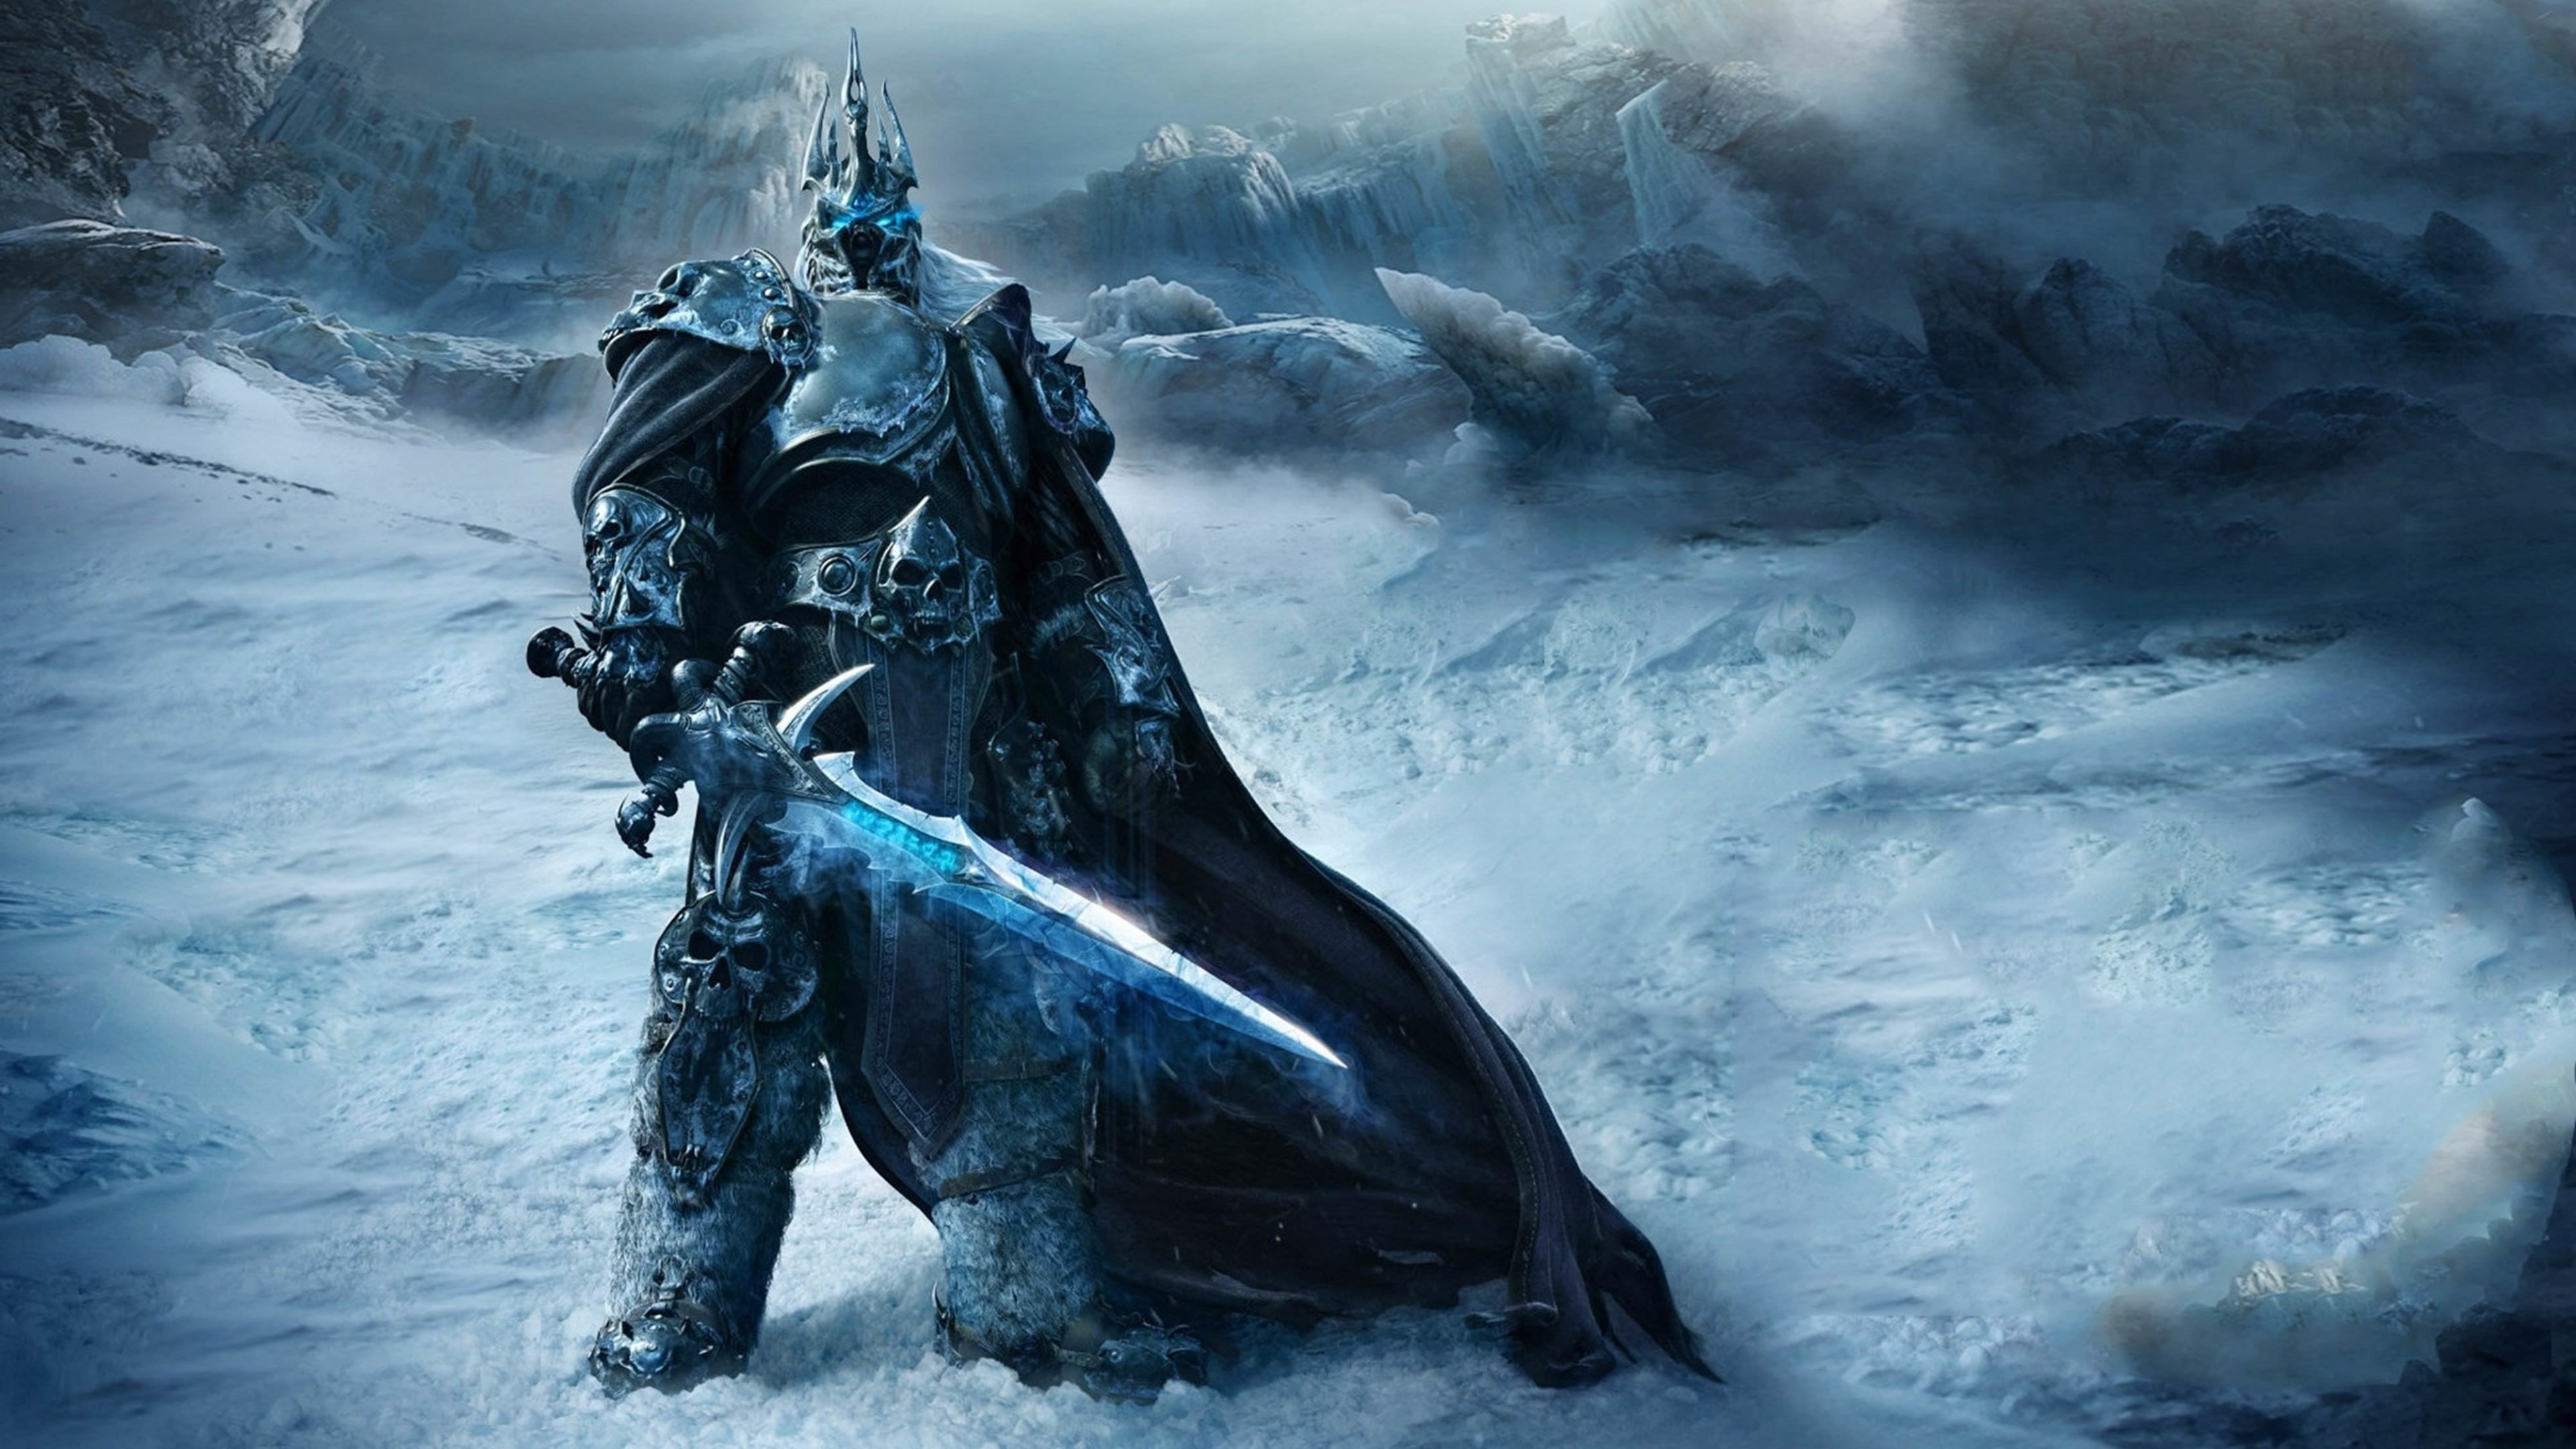 World of Warcraft: Wrath of the Lich King Wallpaper for Desktop 4K 3840x2160